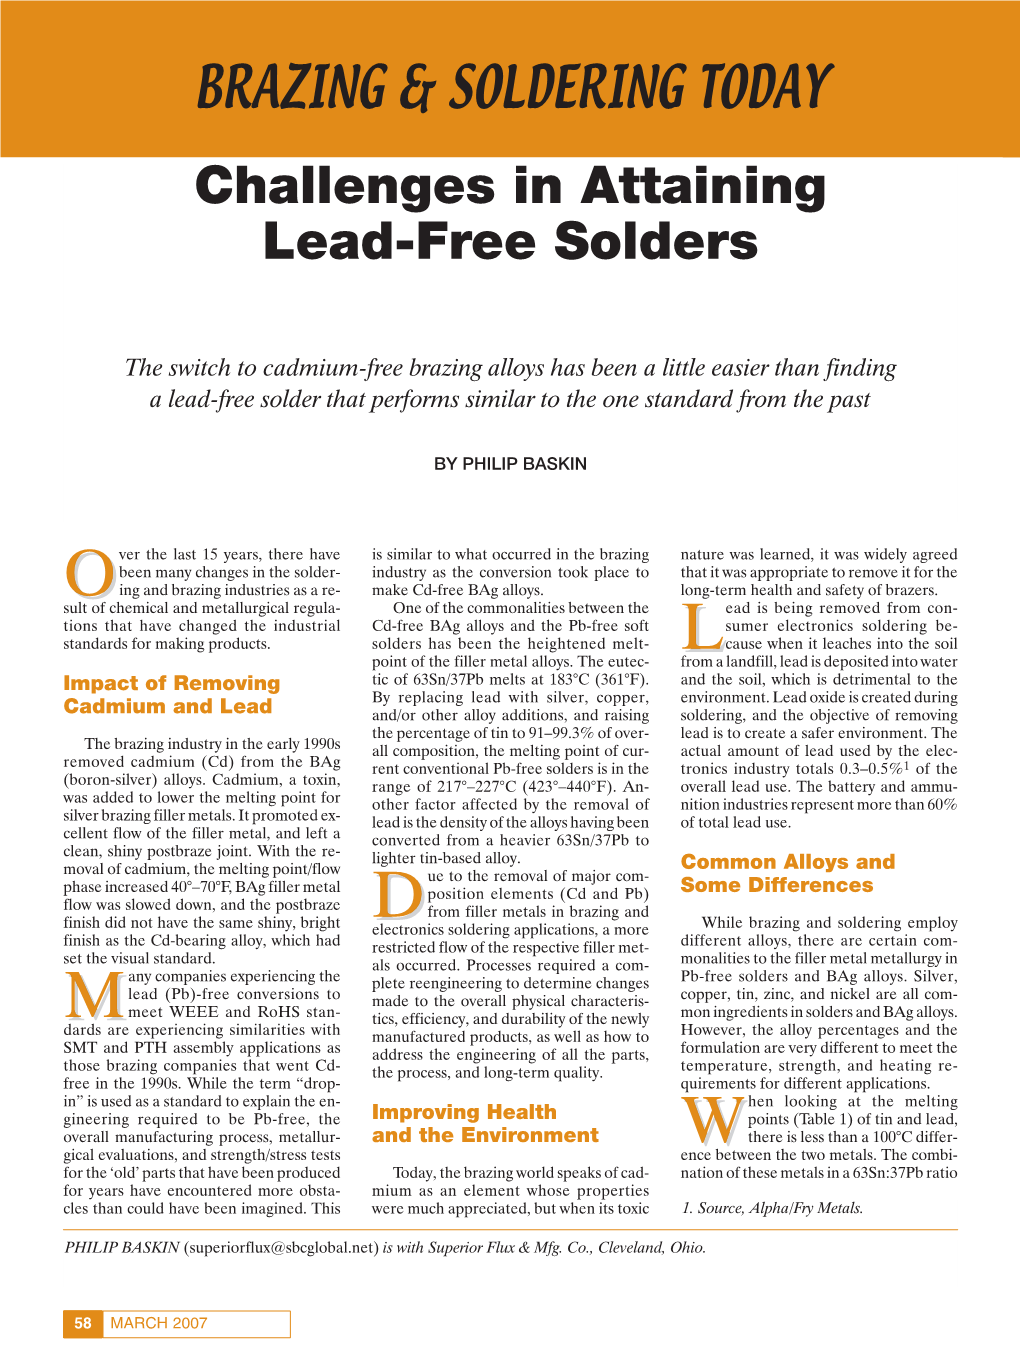 BRAZING & SOLDERING TODAY Challenges in Attaining Lead-Free